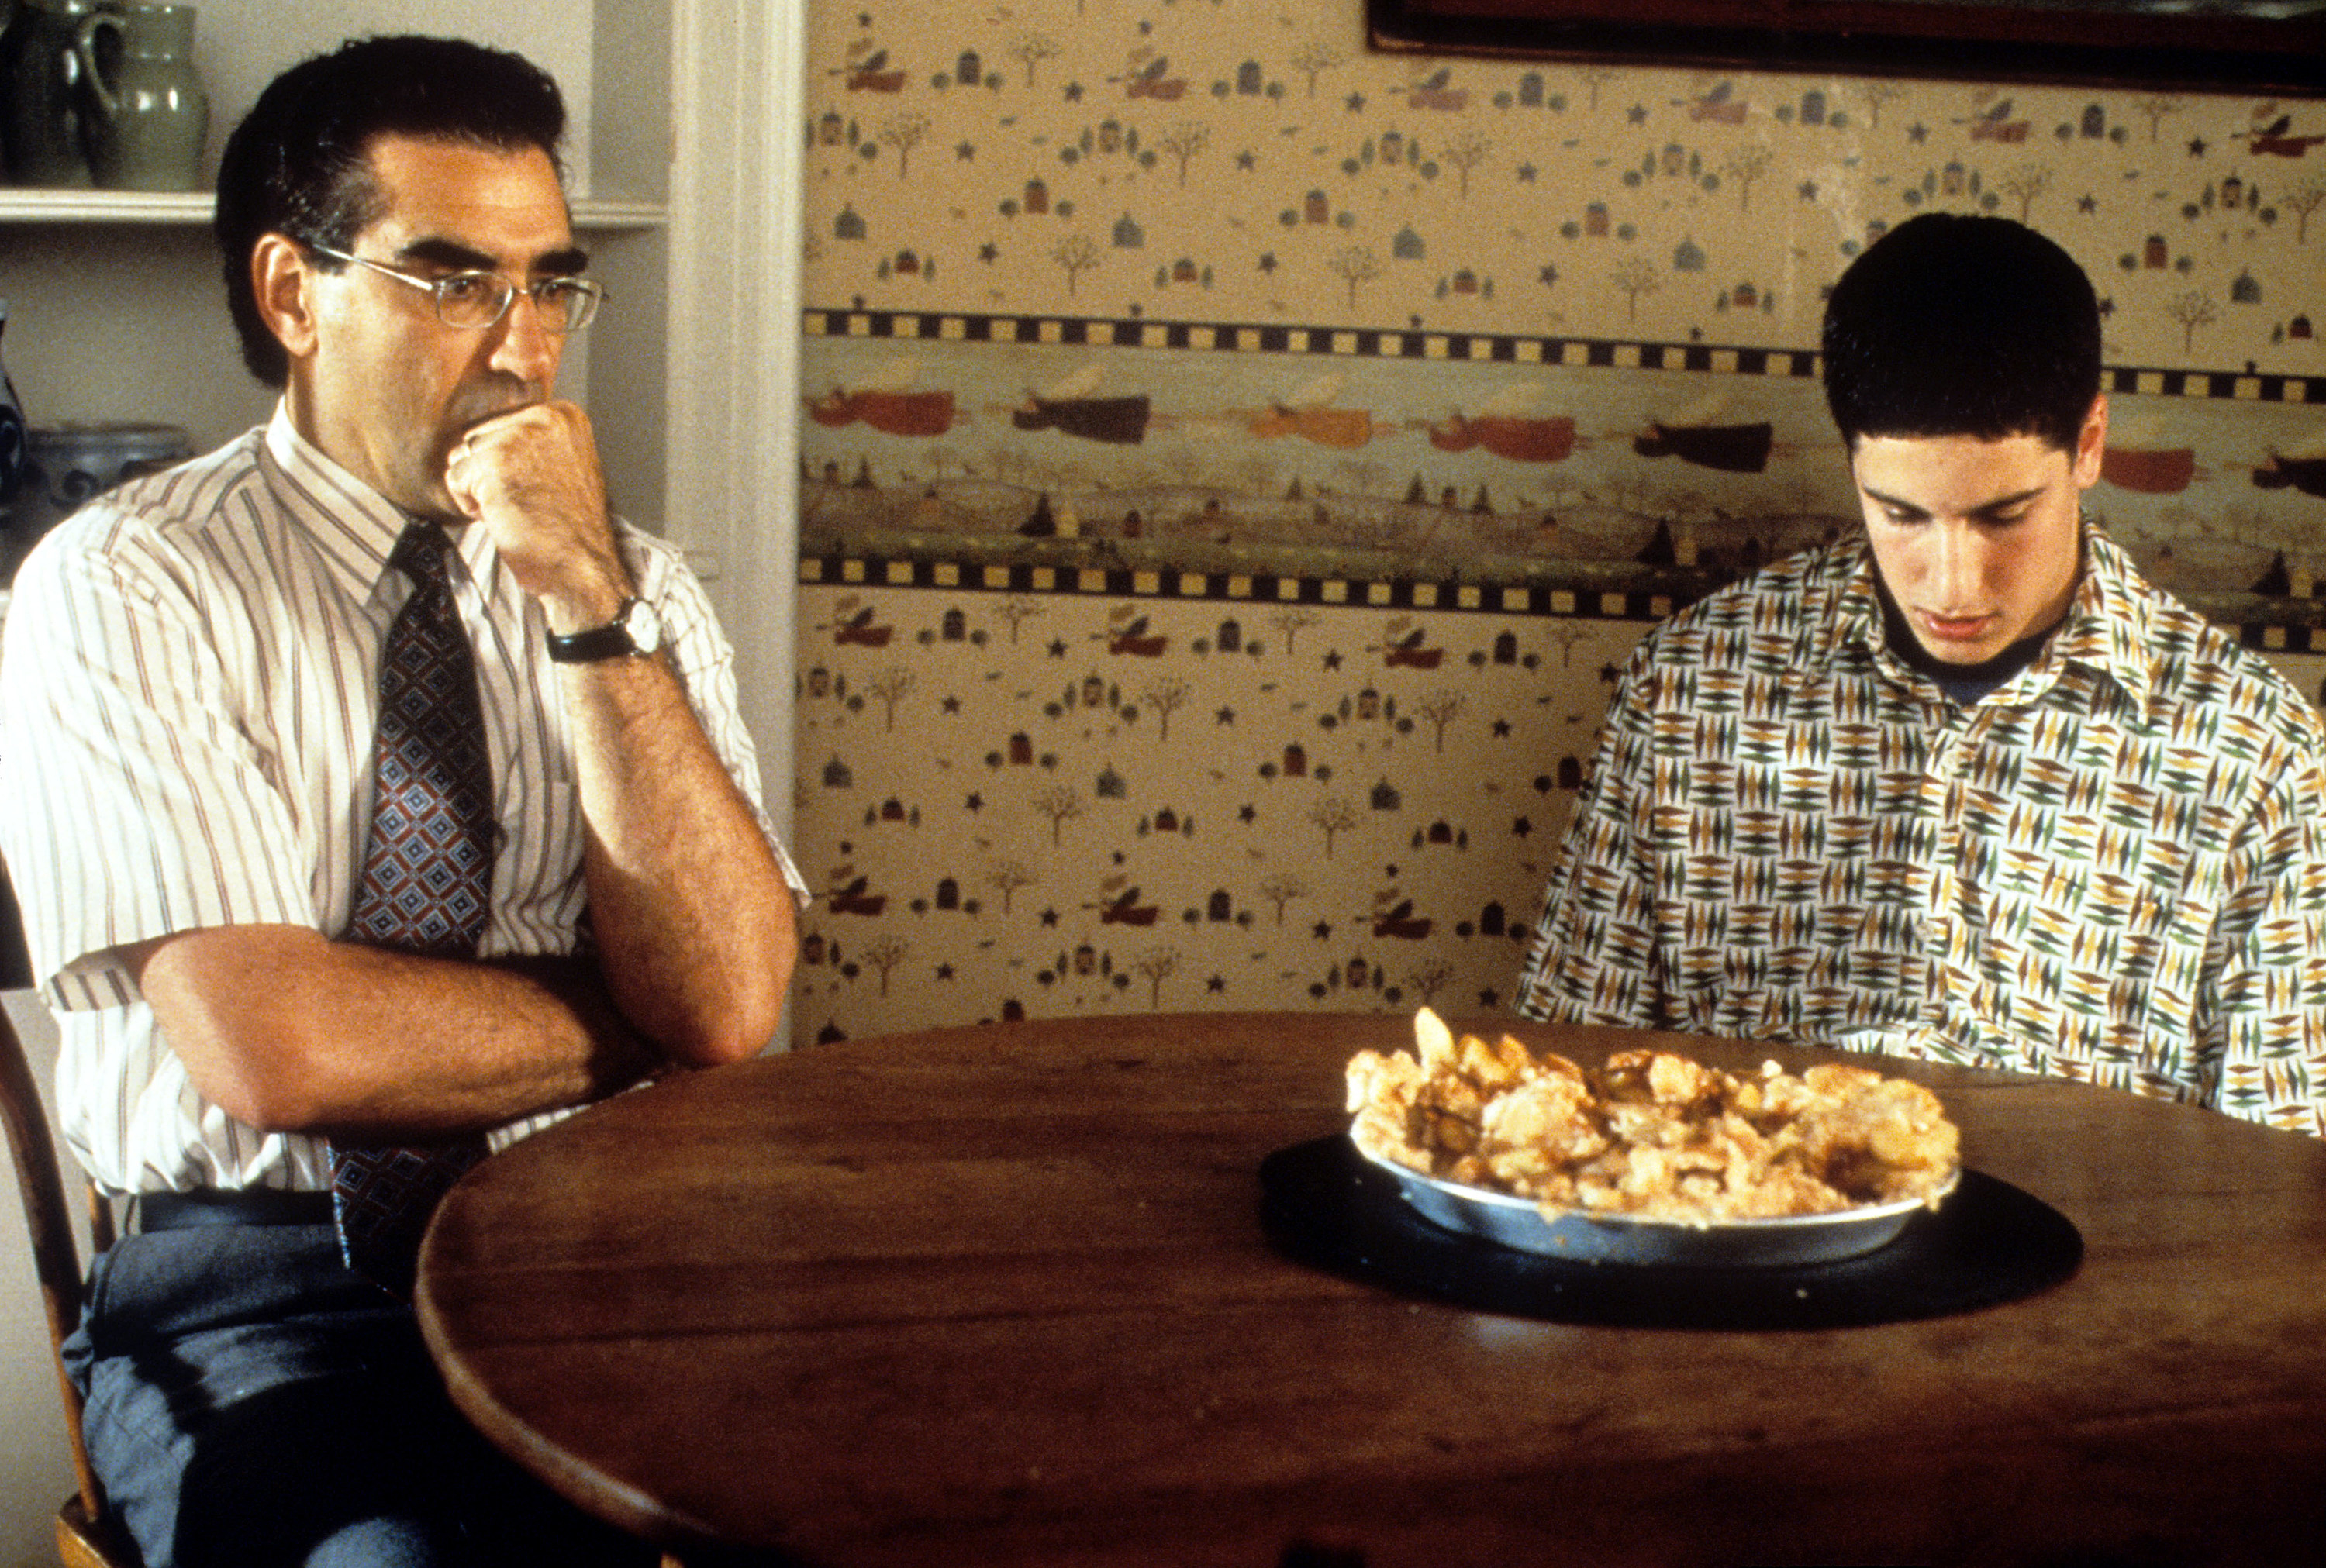 Eugene sits at a kitchen table with a young man American Pie